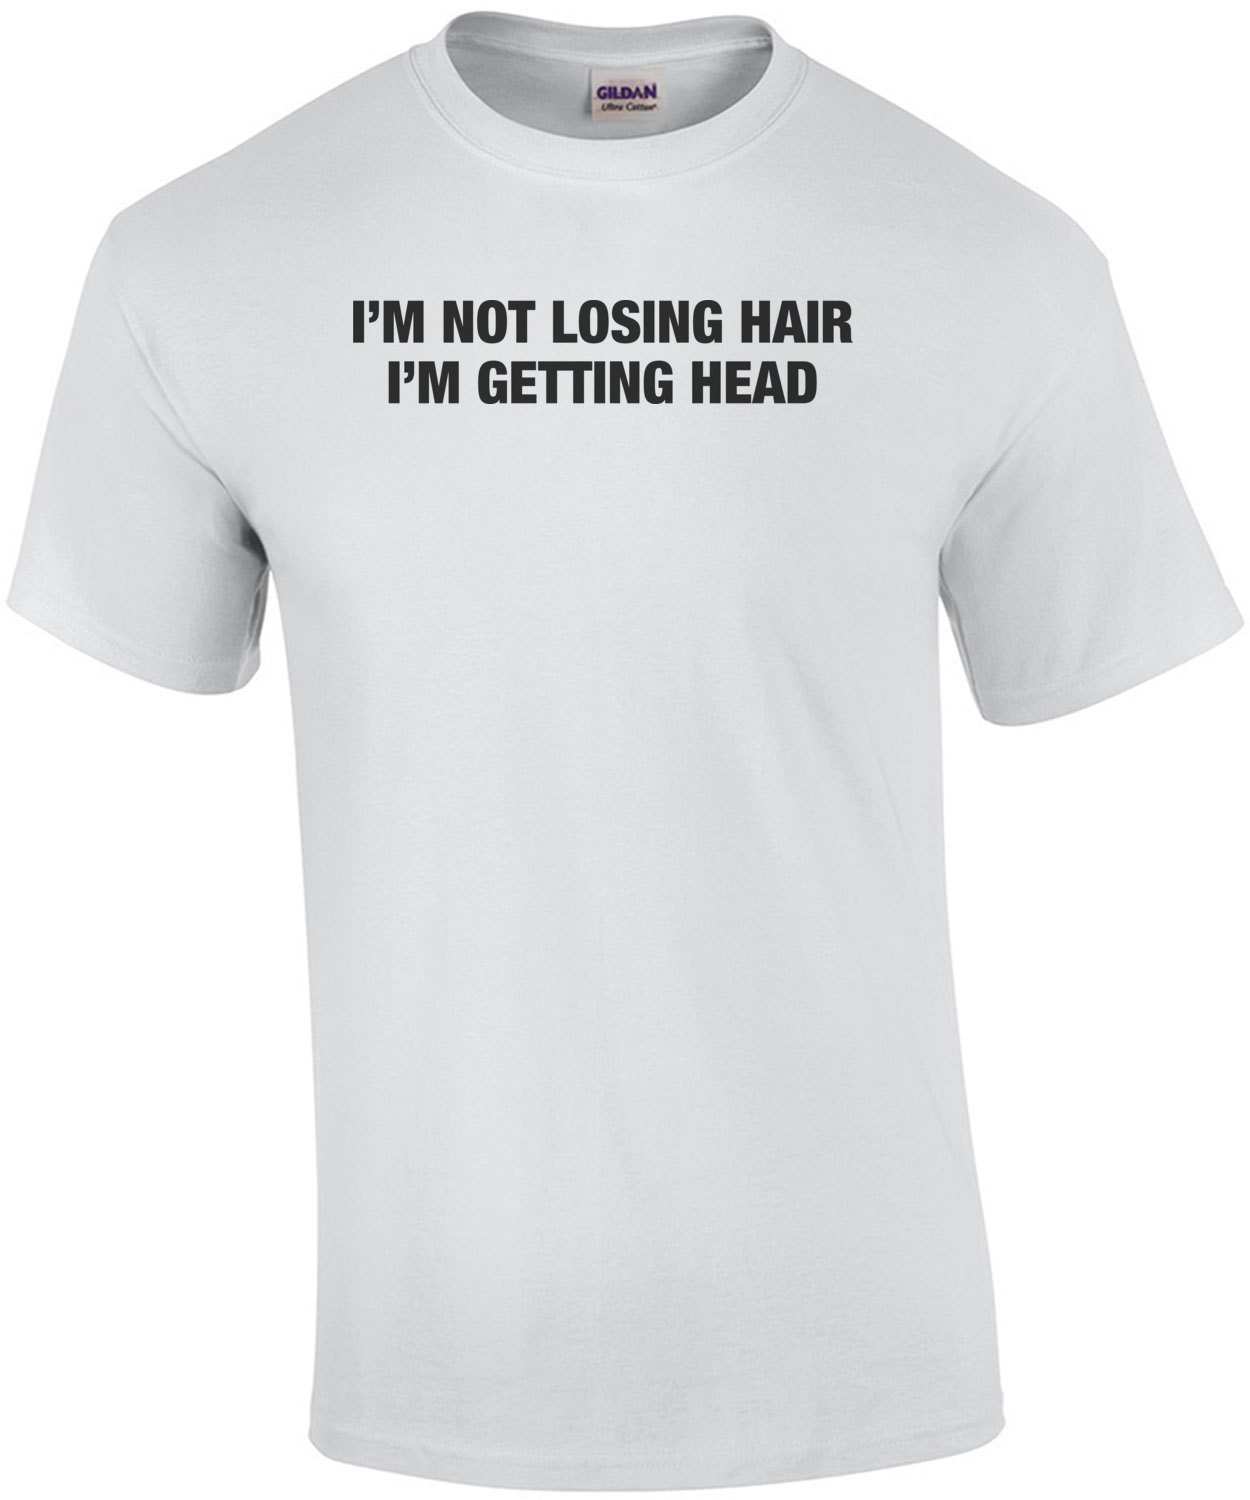 IM NOT GOING BALD JUST GETTING MORE HEAD  T SHIRT BIKER GANG STYLE FUNNY 